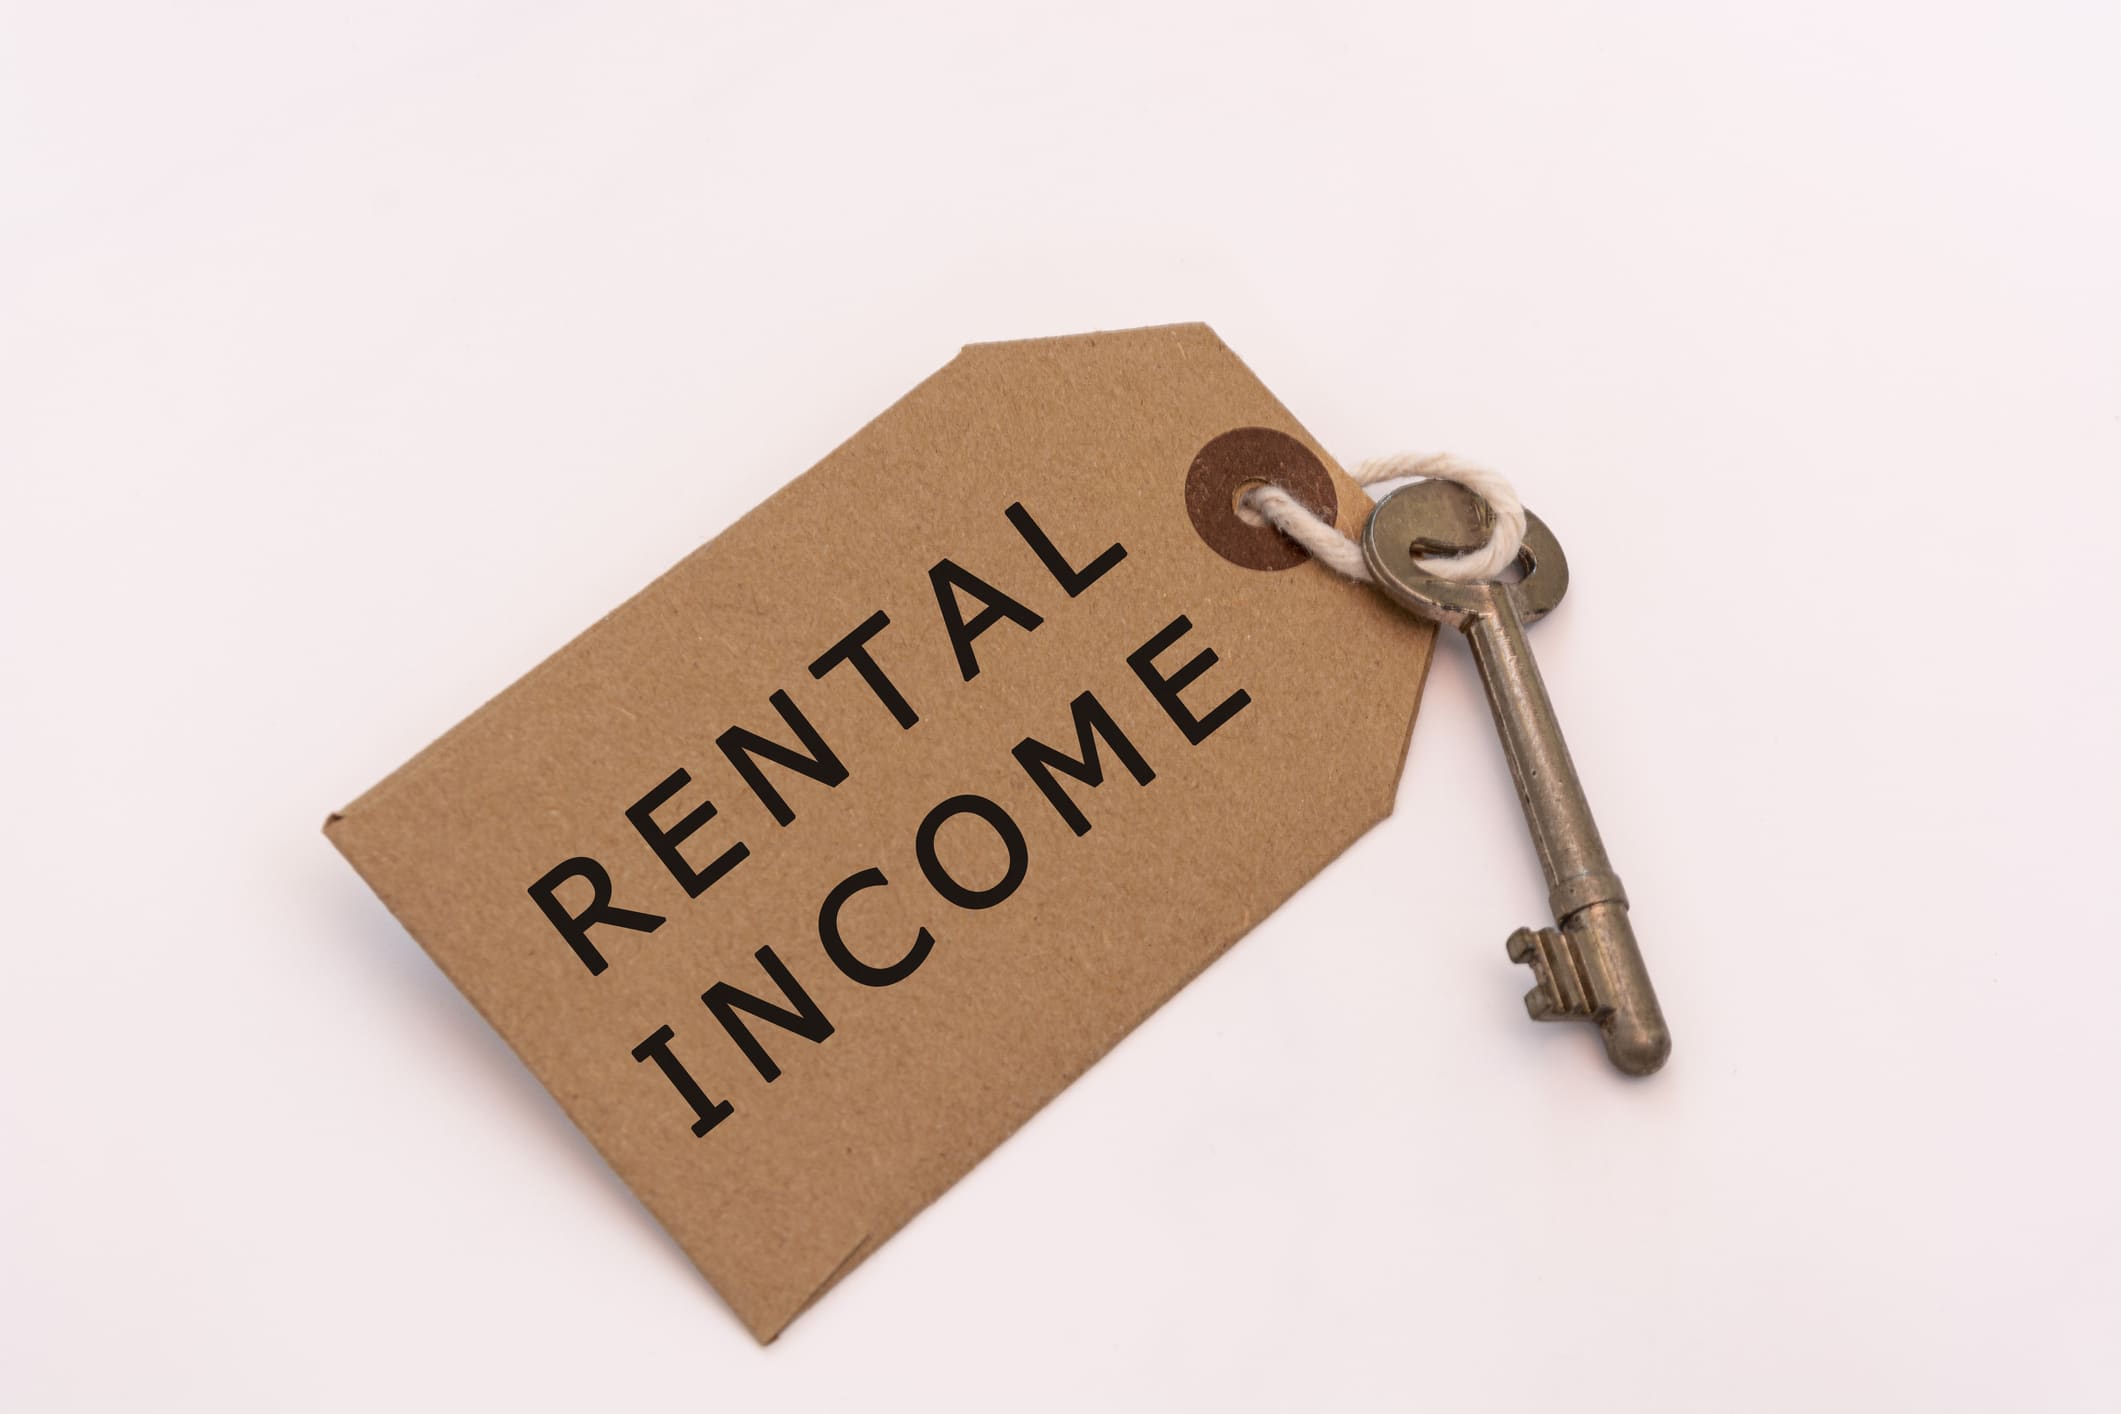 Rental income tax in the UK